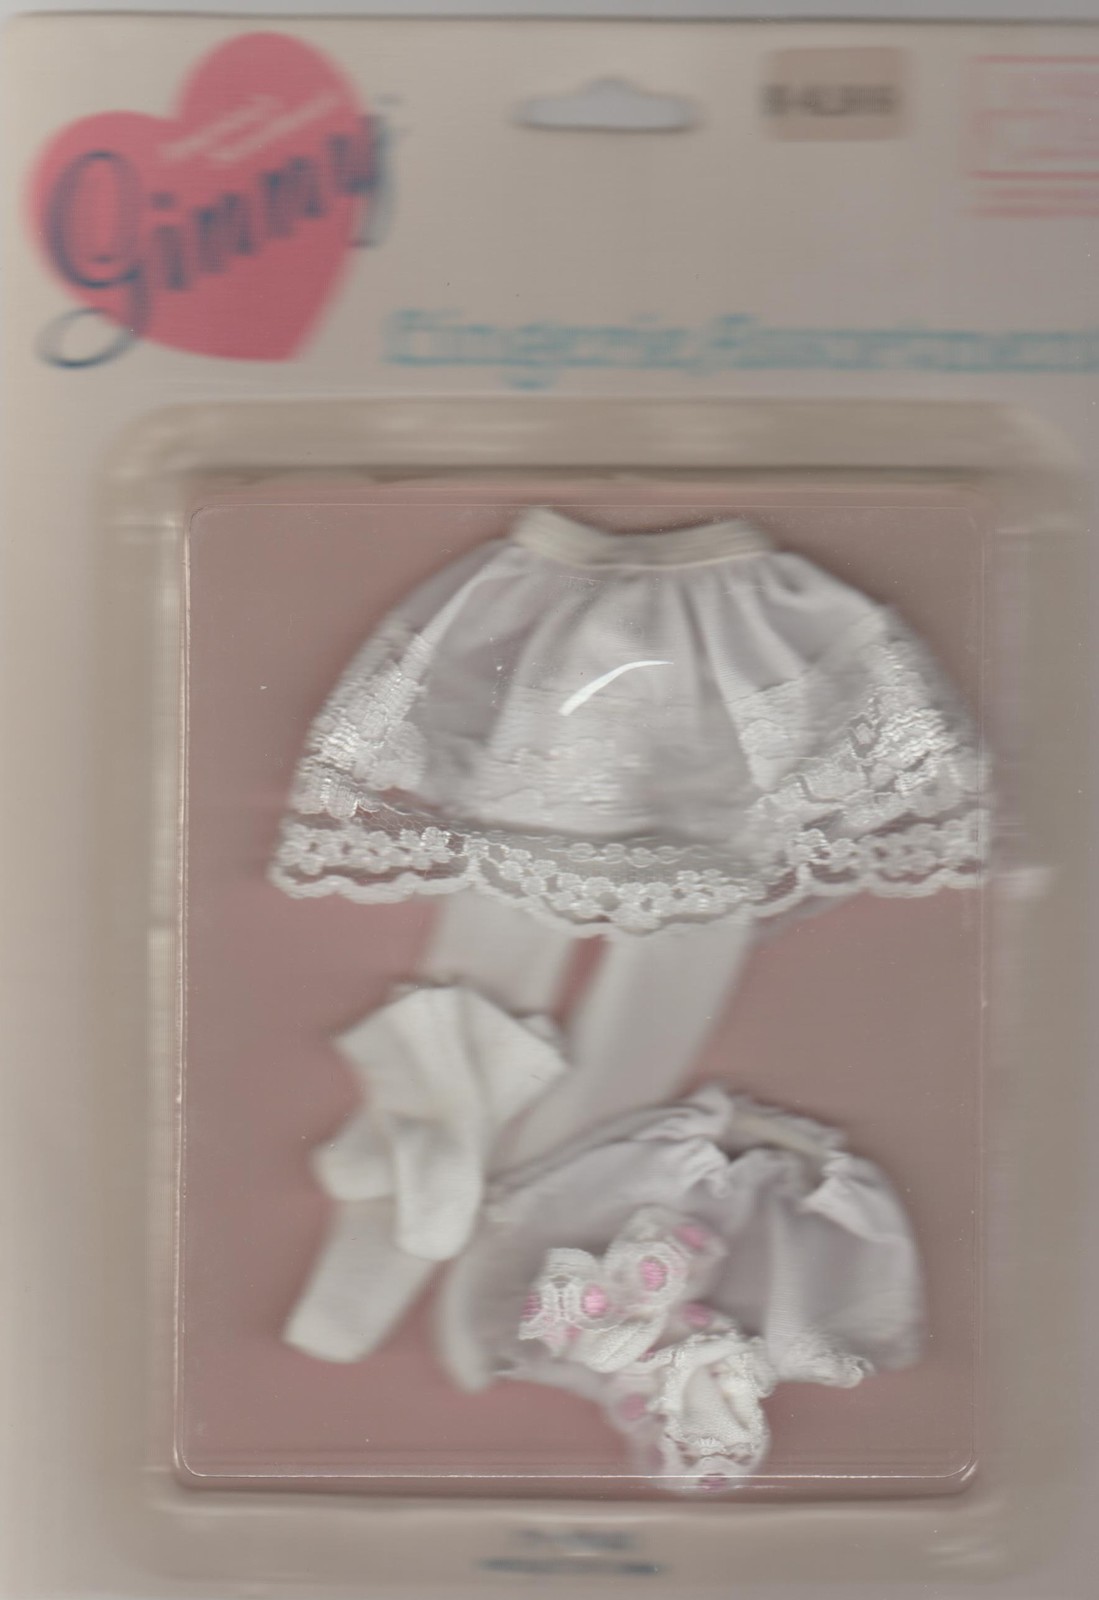 Ginny Lingerie Assortment Vogue doll accessories 1987 sealed as new - $18.00